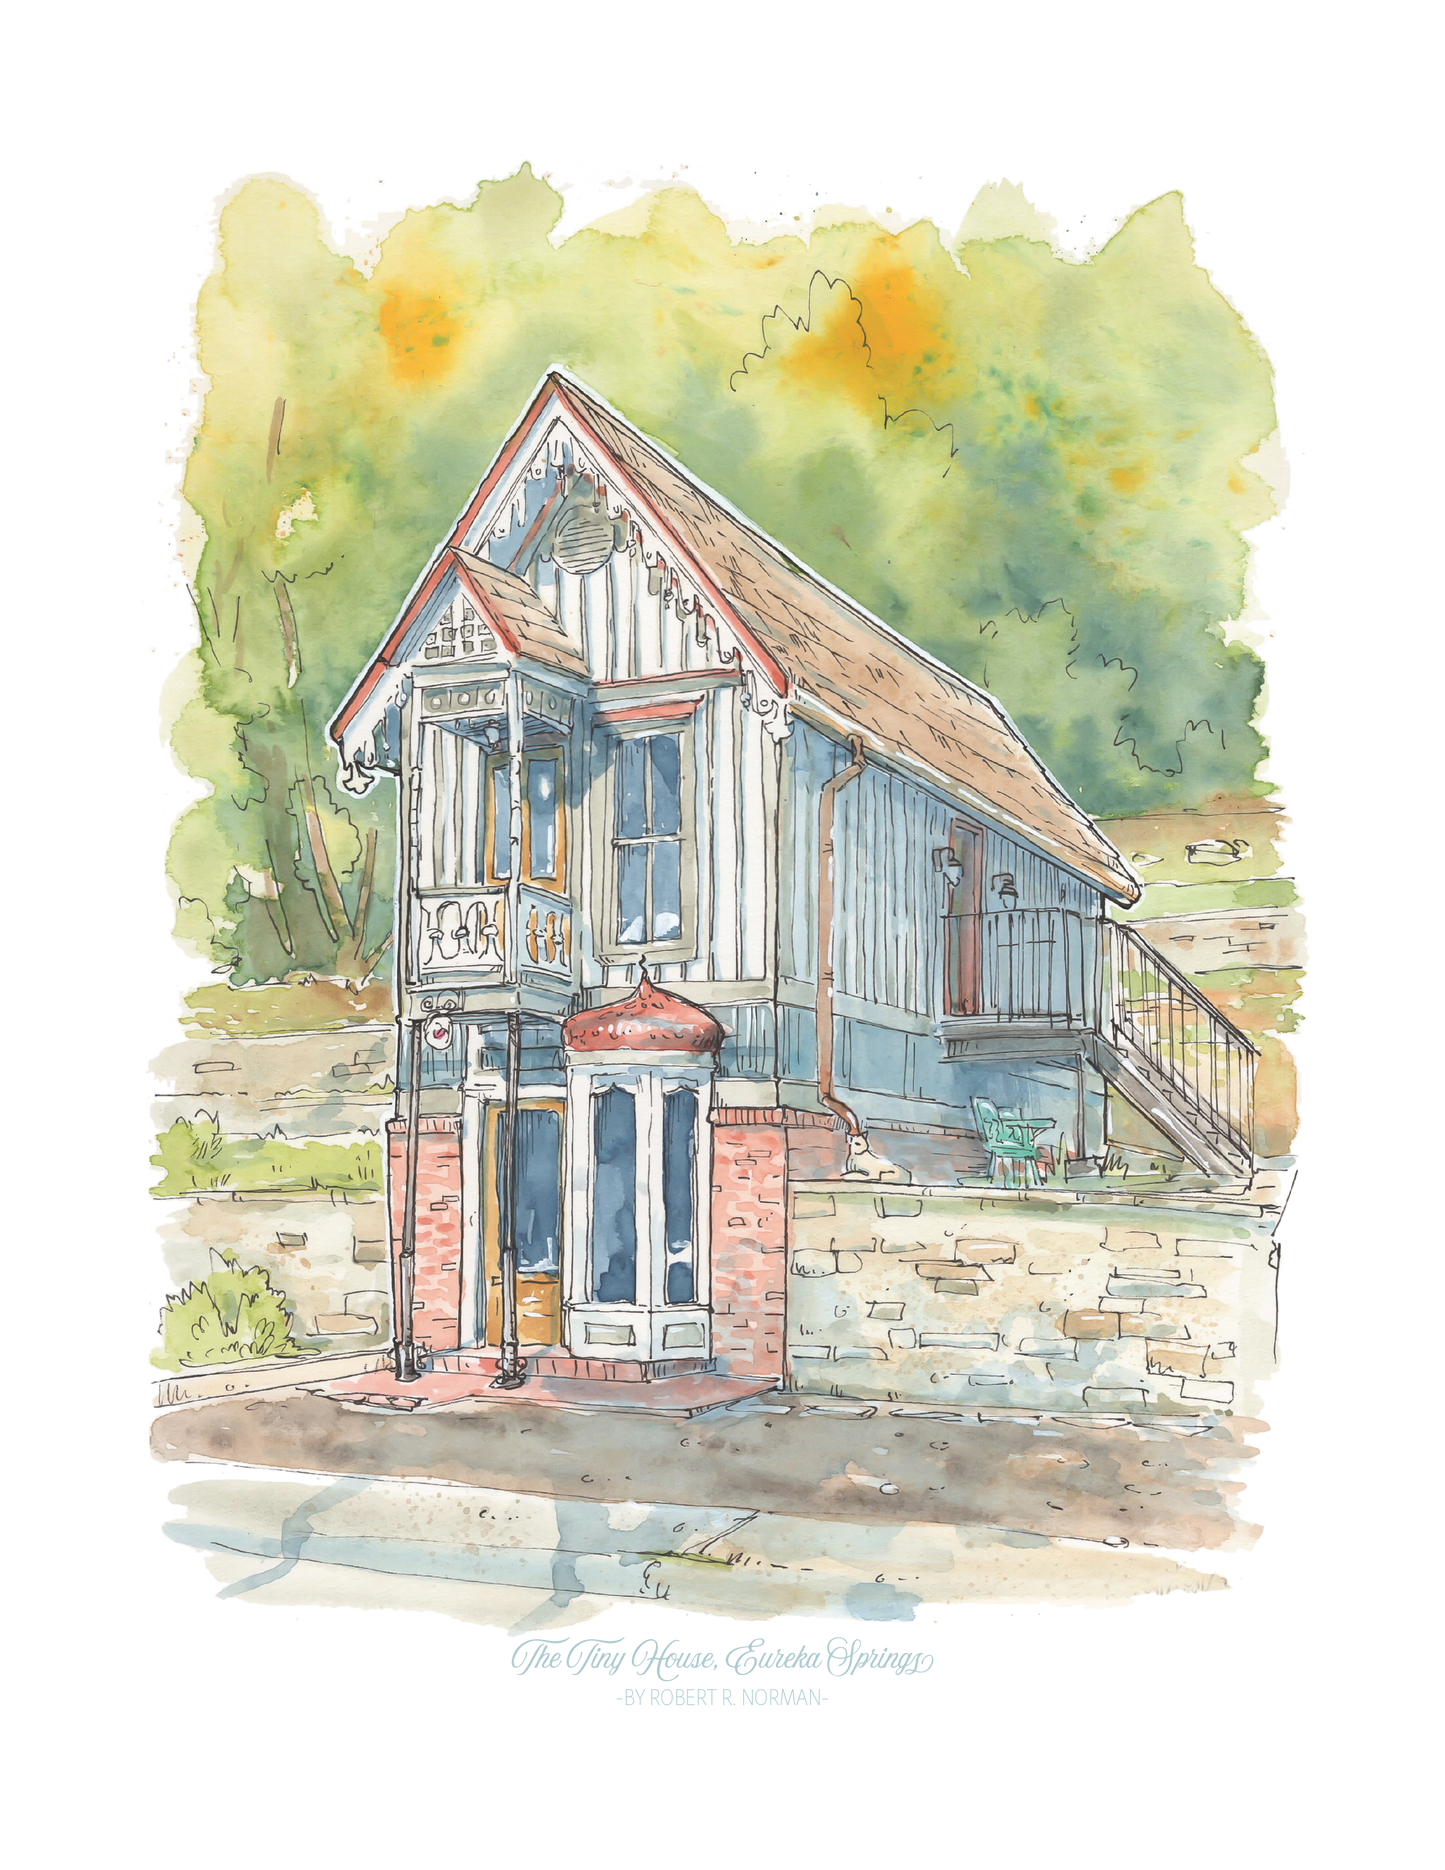 The Tiny House Of Eureka Springs Open Edition Archival Print